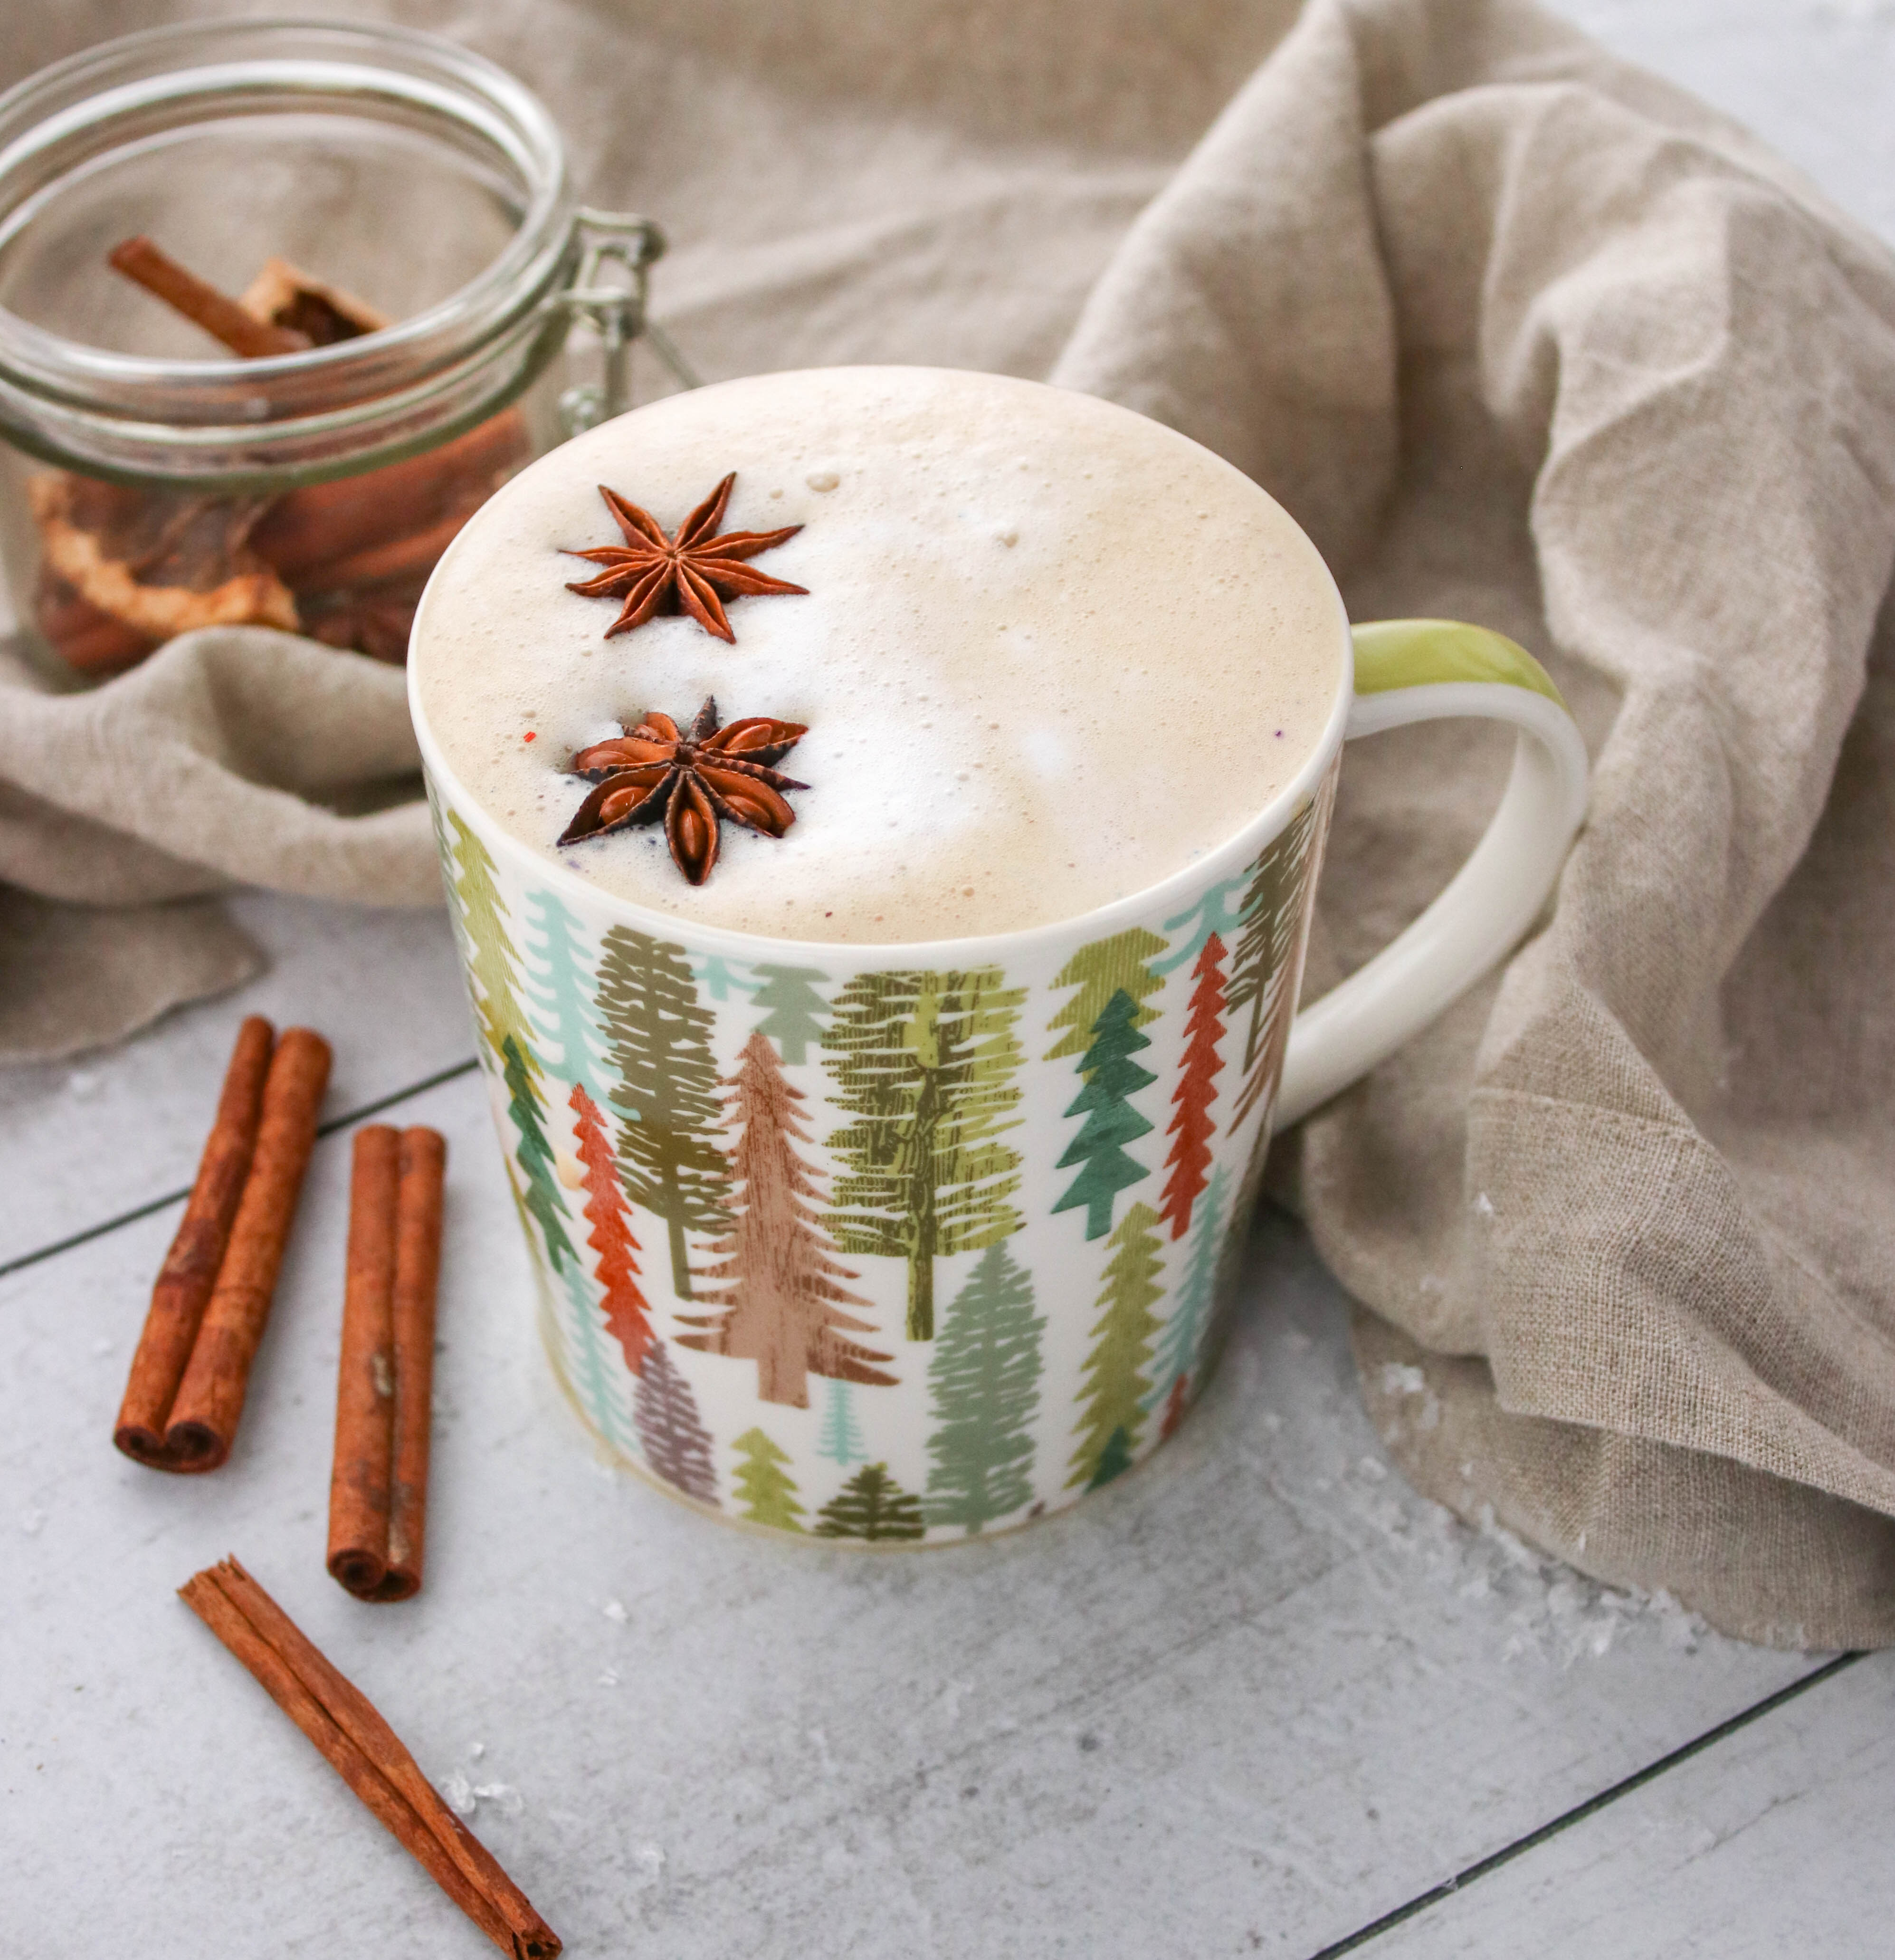 Stay Cozy with Easy Instant Pot Chai – Plum Deluxe Tea